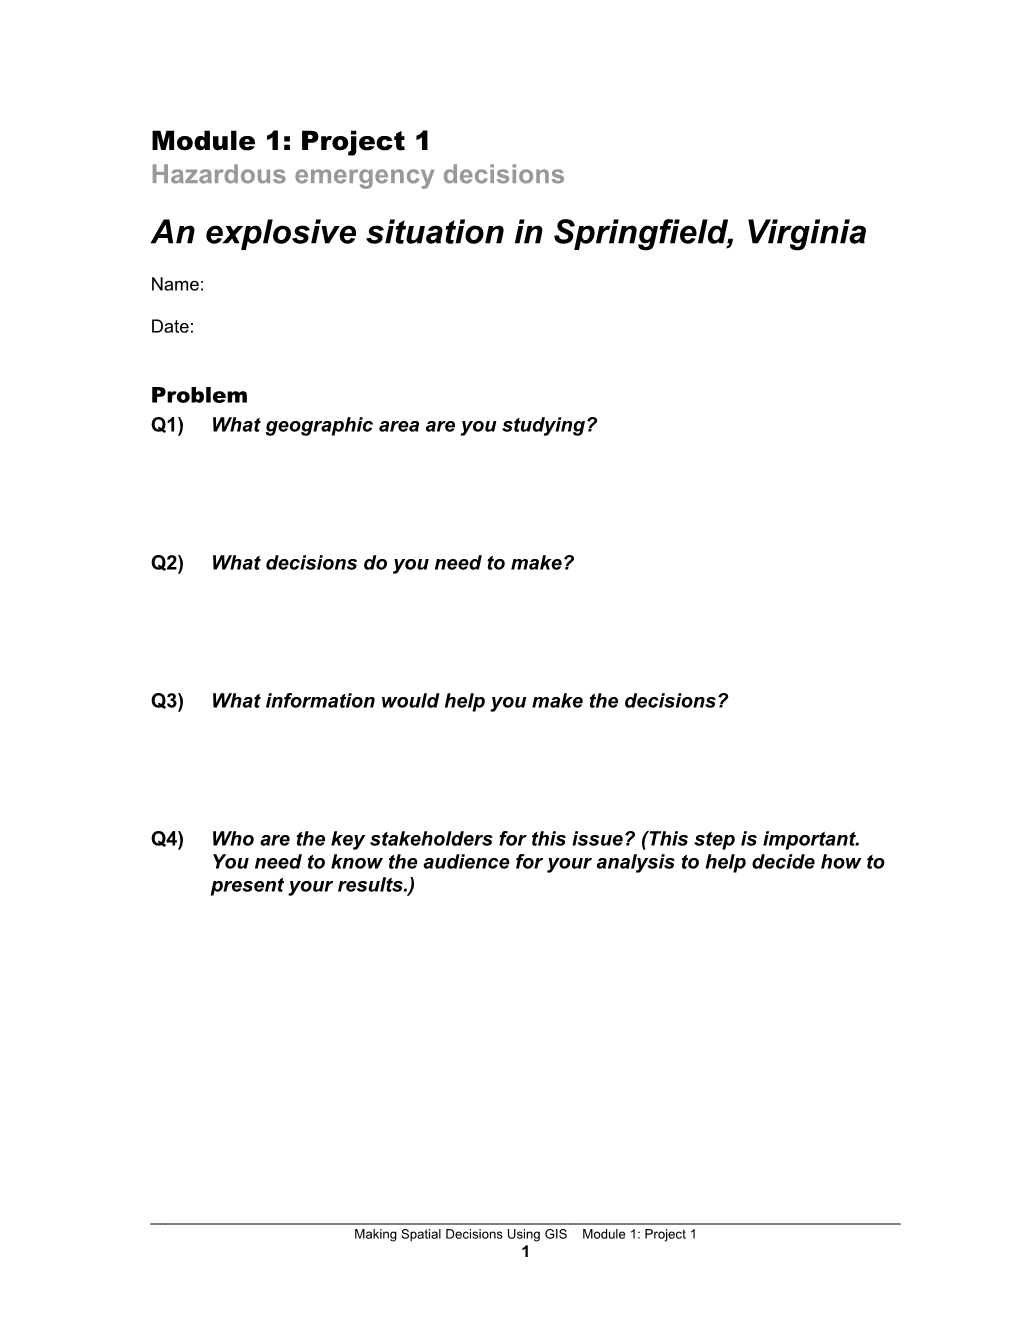 An Explosive Situation in Springfield, Virginia